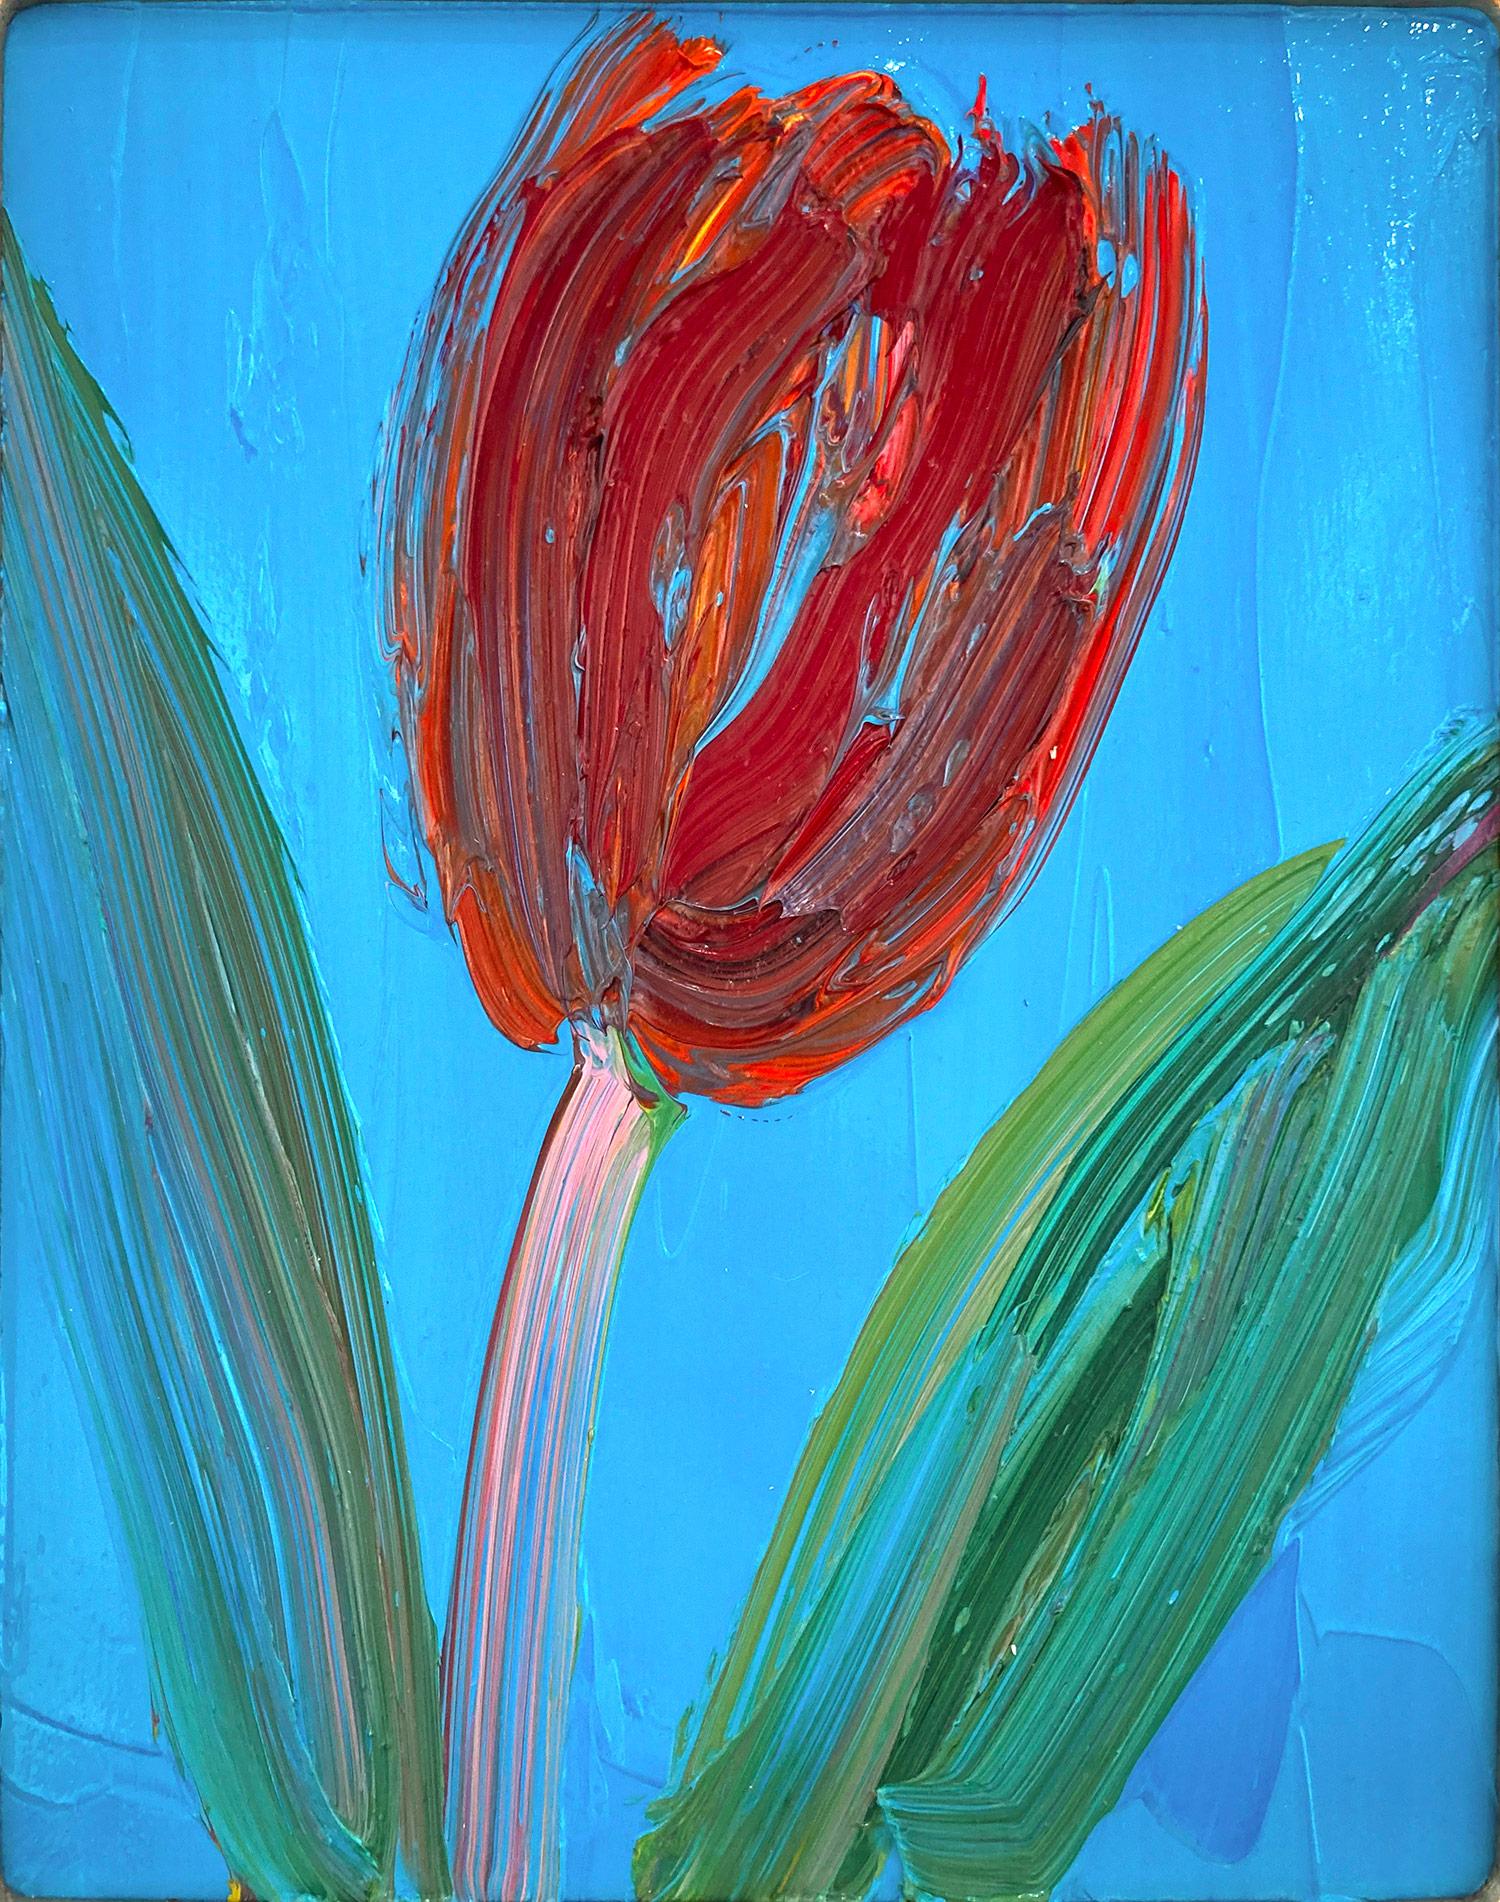 A wonderful composition of one of Slonem's newest series, Tulips. This piece depicts gestural figure of a red Tulip on a light cerulean blue background with thick use of paint. Inspired by nature and a genuine love for animals, Slonem's paintings